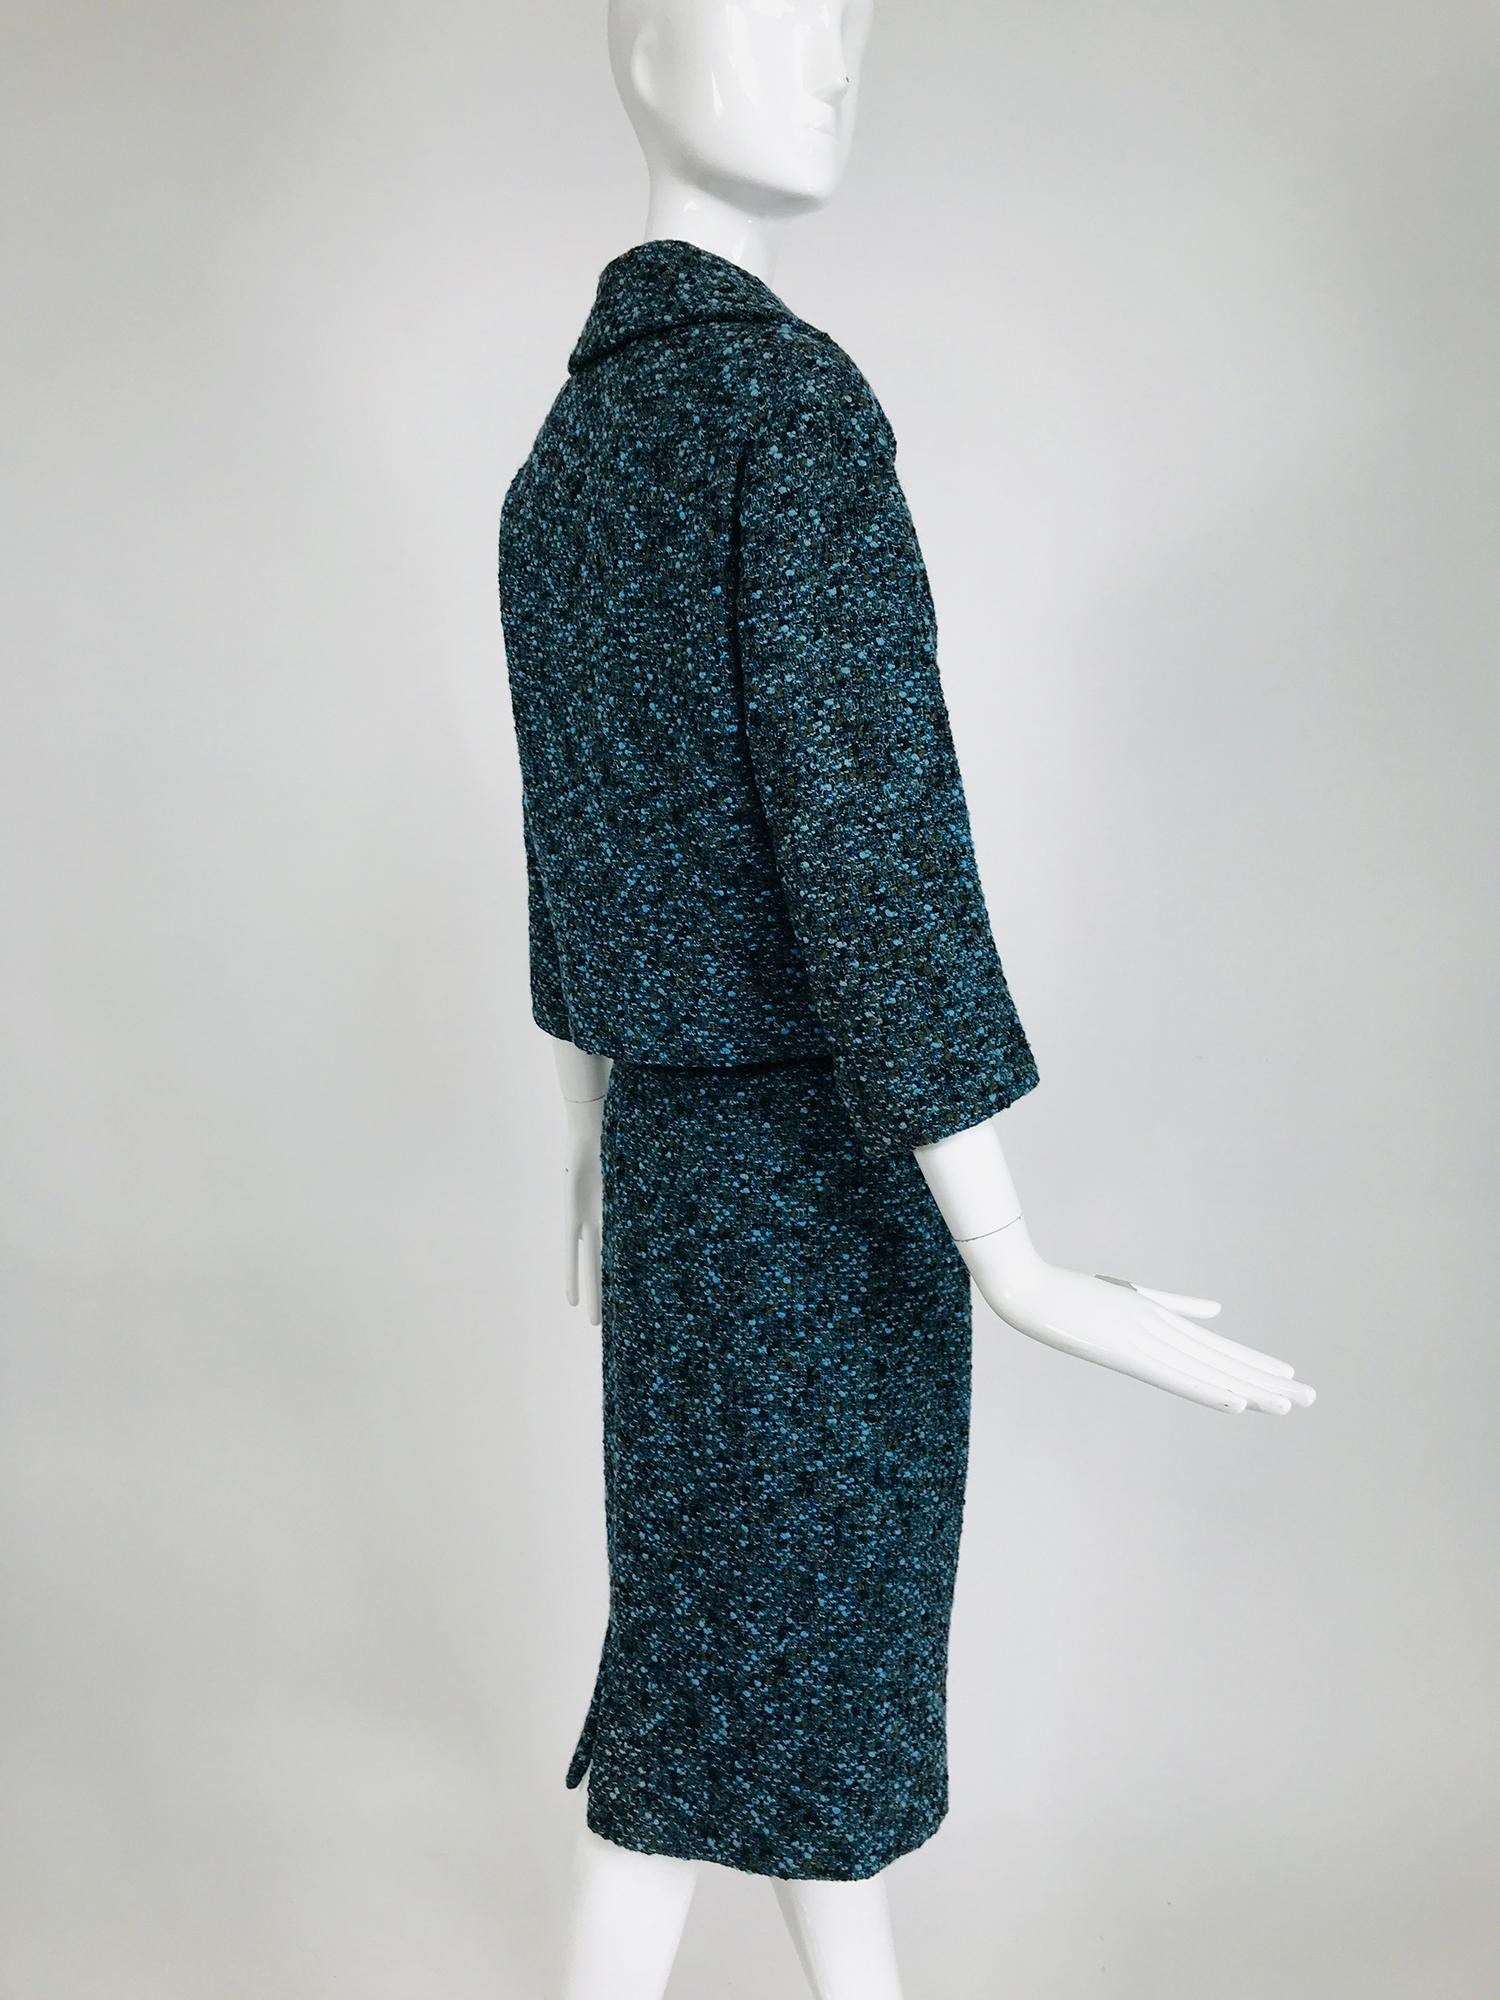 Jeanne Lanvin Numbered Couture Early 1960s Blue Tweed Skirt Suit  For Sale 3